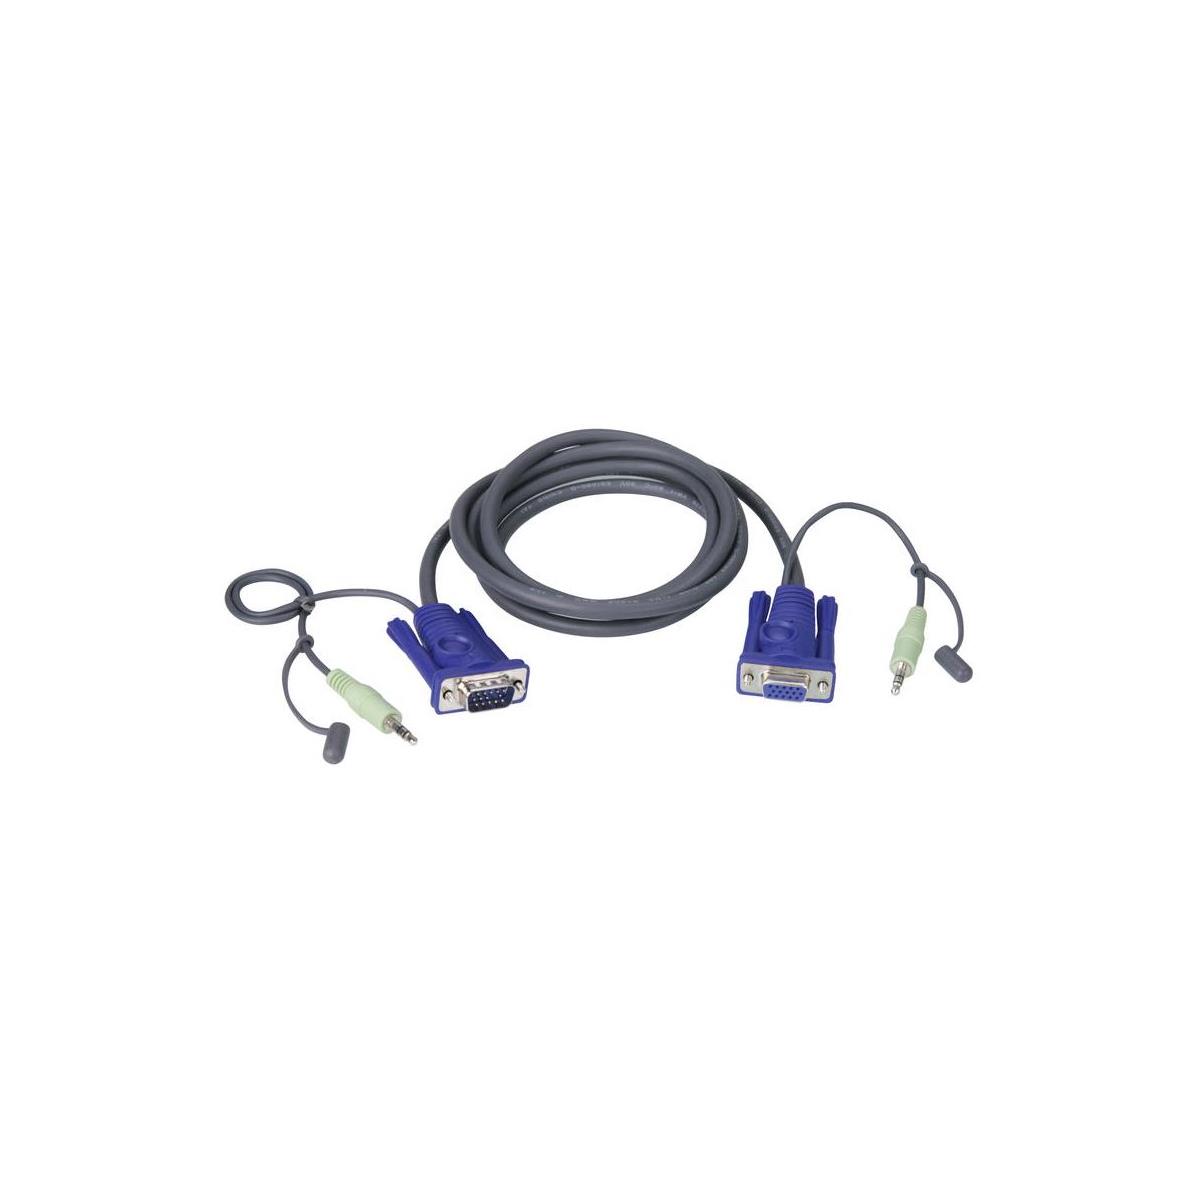 

Aten 2L2402A 6' VGA Cable with Audio for KVM Switches